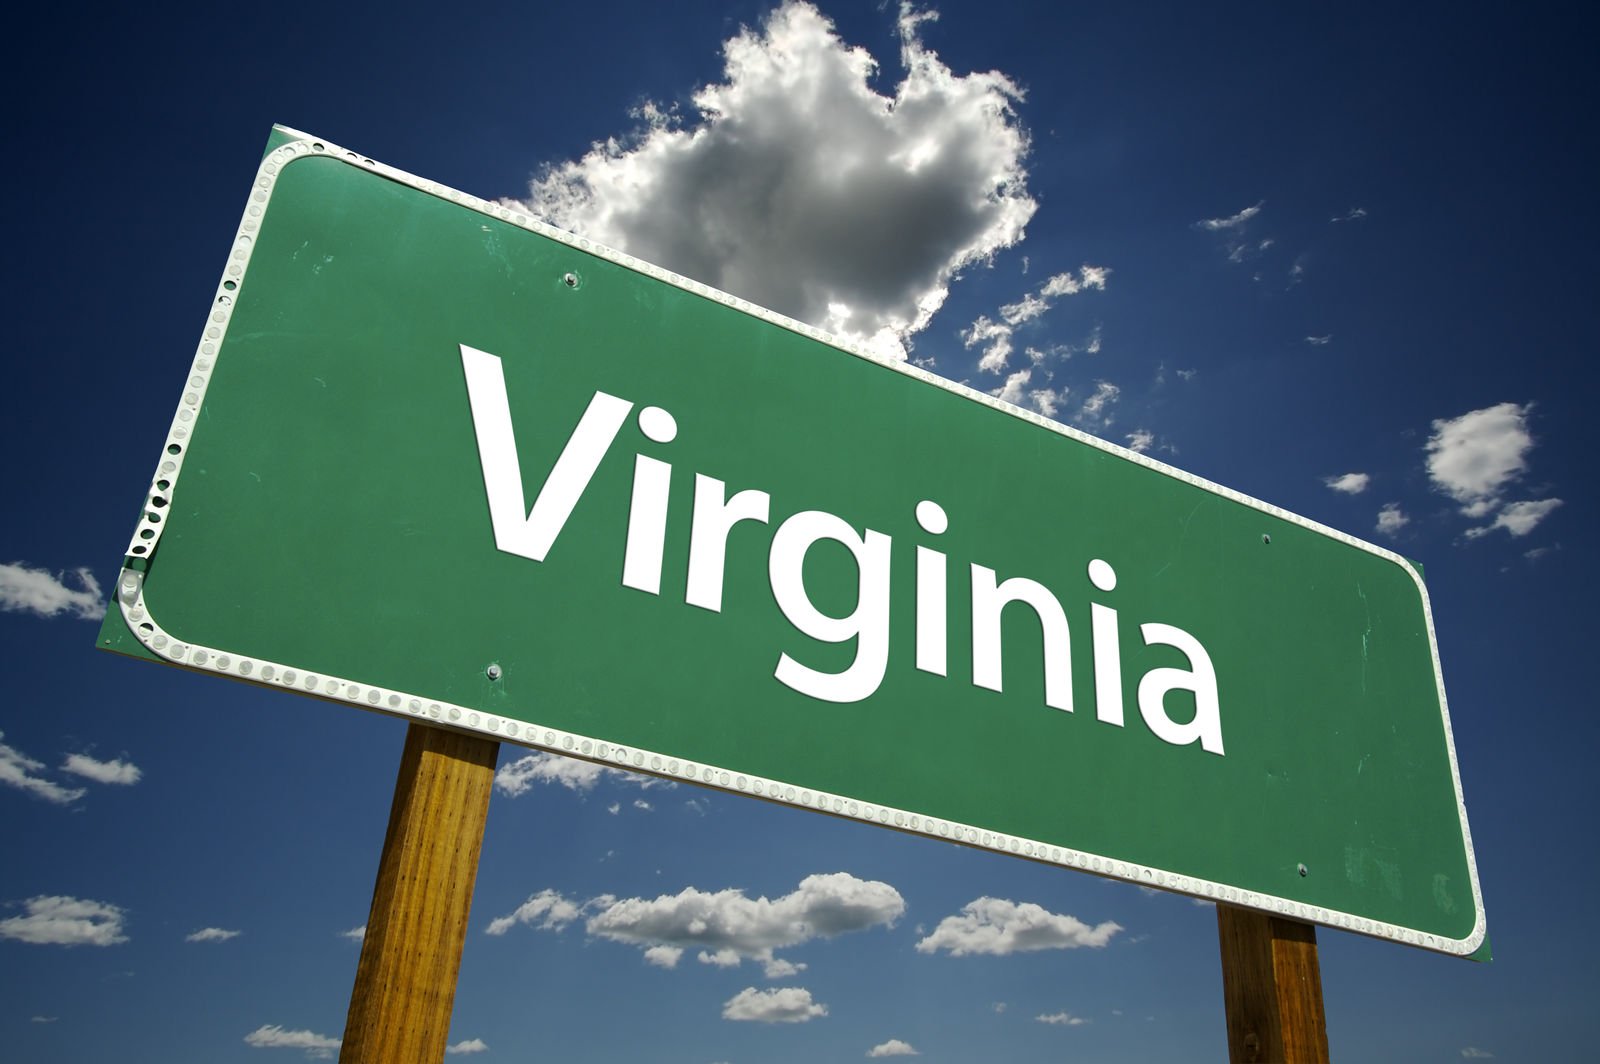 Virginia Windshield Replacement Insurance: What are the full glass coverage laws in Virginia?